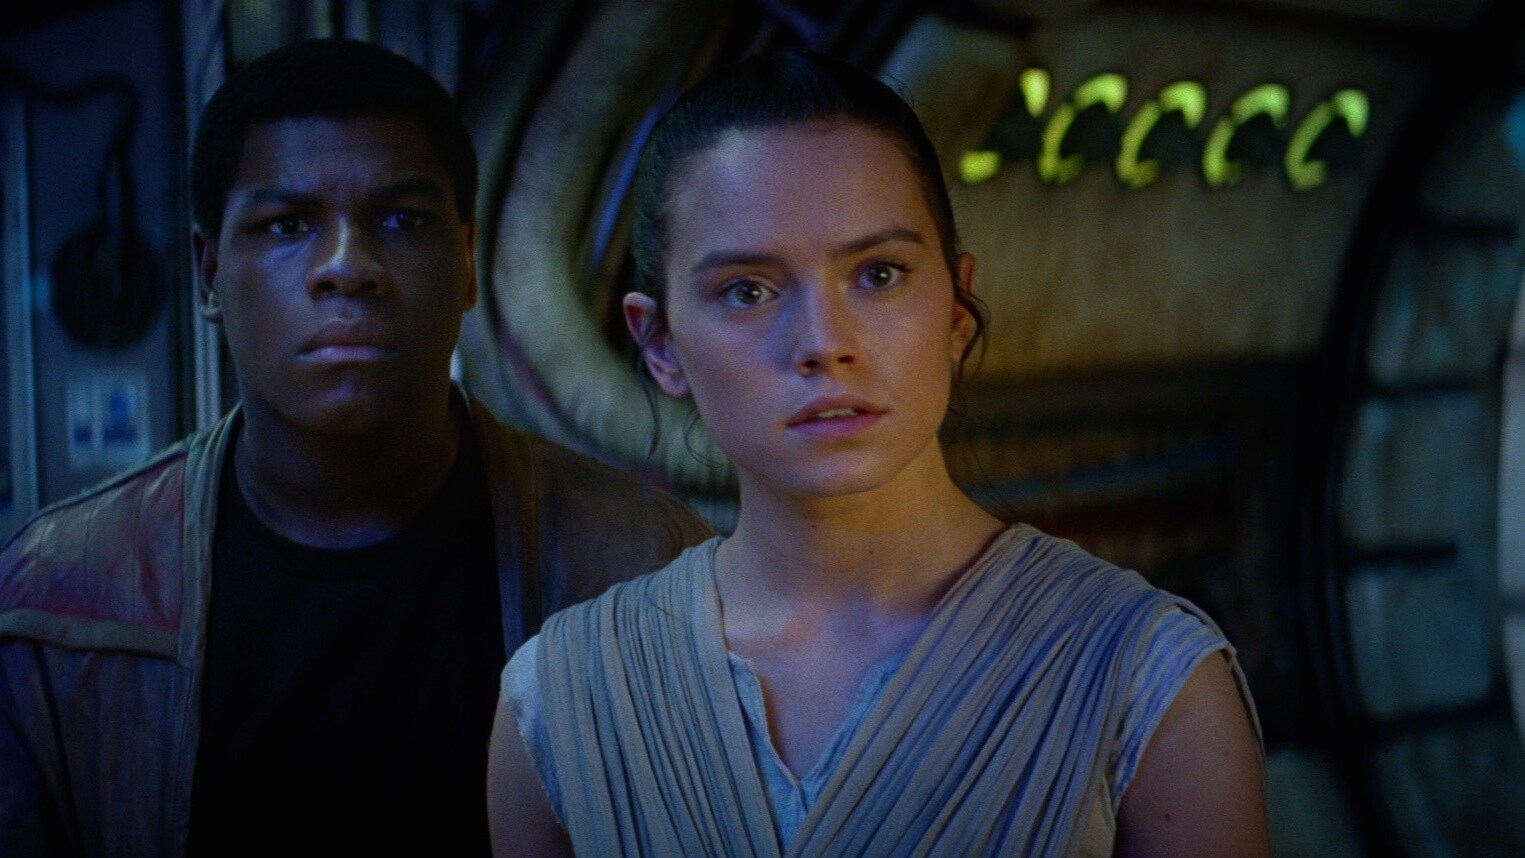 8 Things to Look (and Listen) for in Star Wars: The Force Awakens